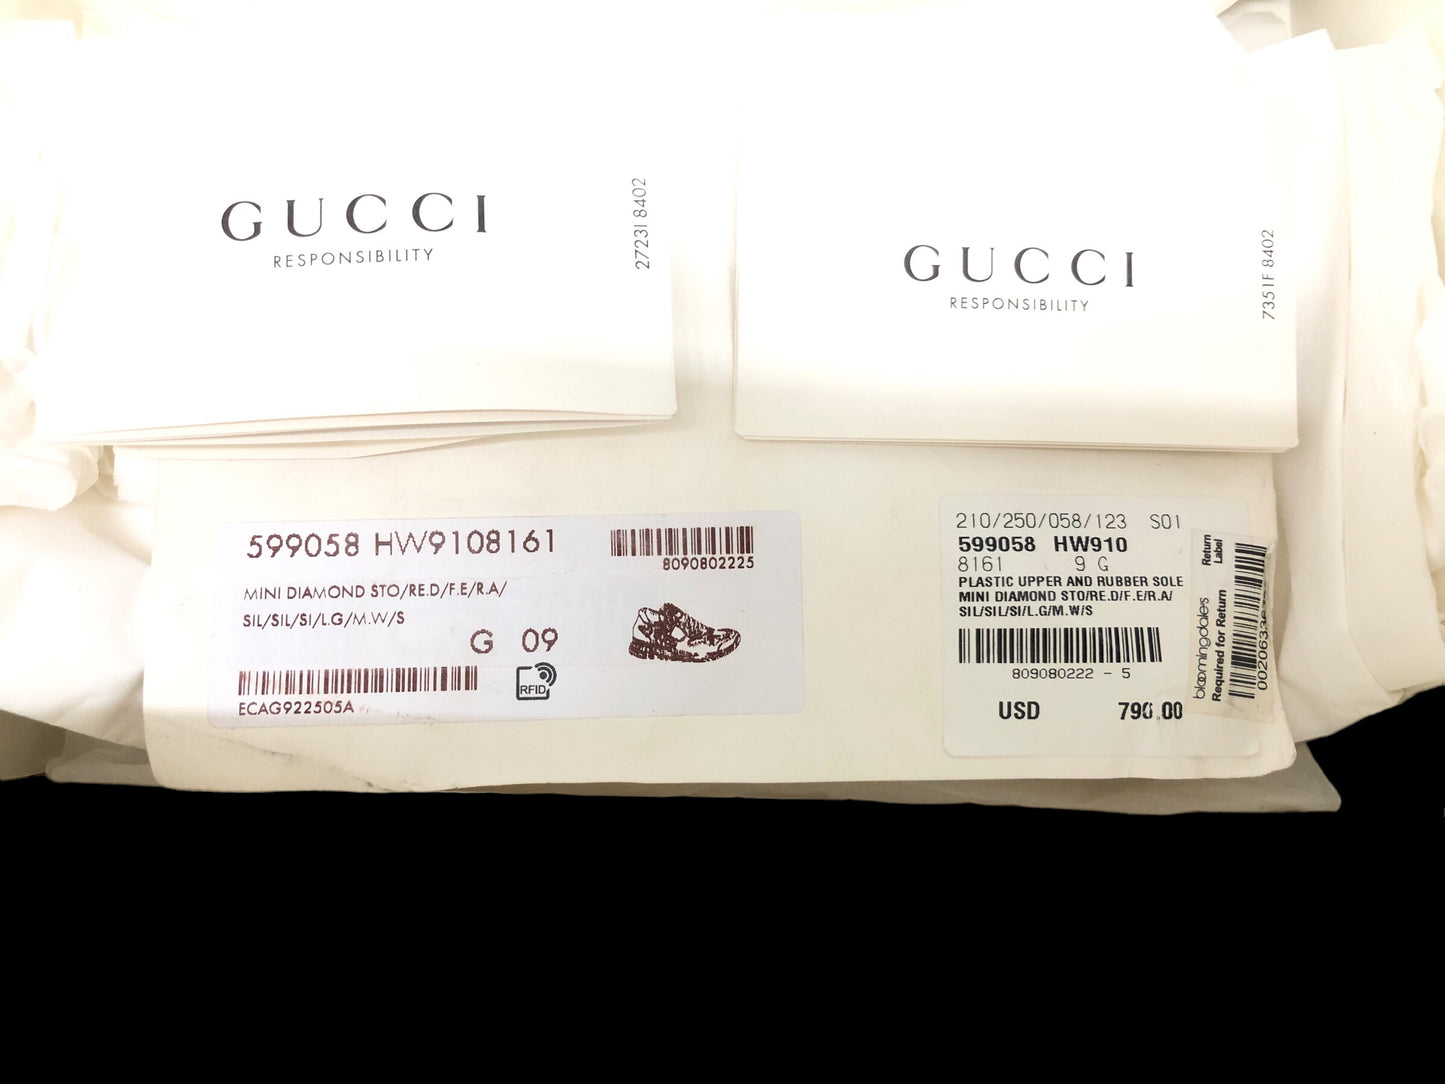 Gucci Ultrapace "Silver" 599058 HW910 8161 US Size 9